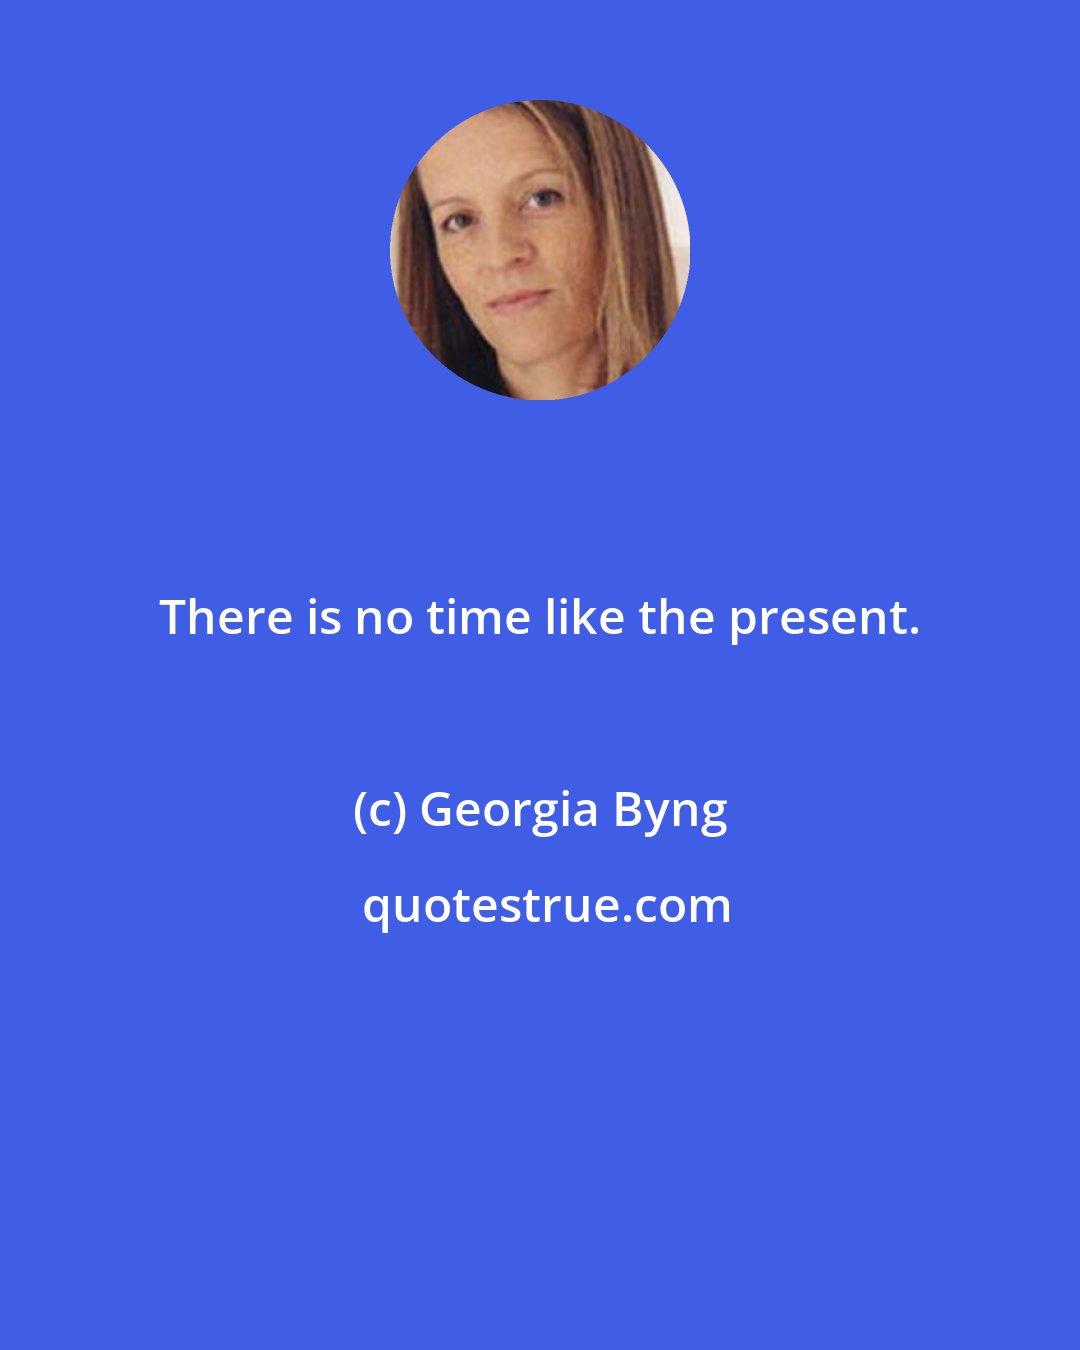 Georgia Byng: There is no time like the present.